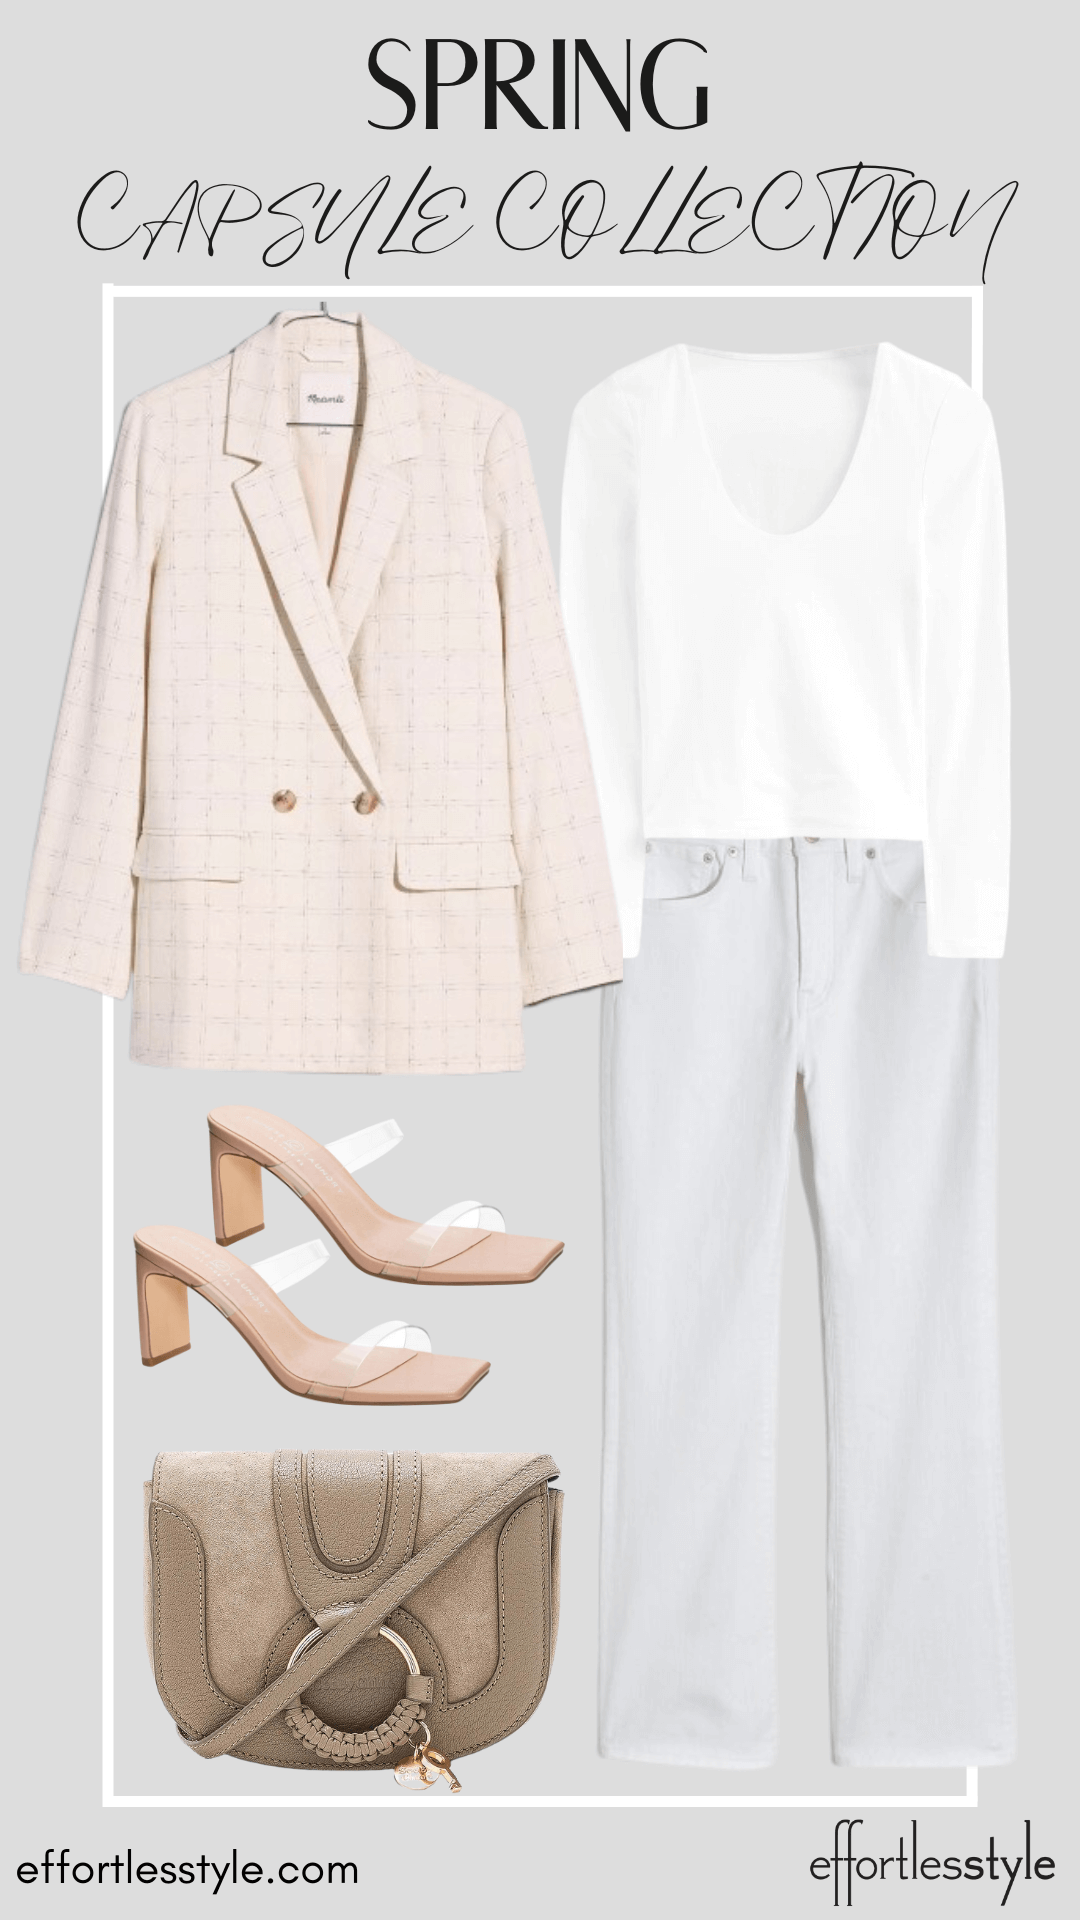 Neutral Blazer & Long Sleeve Tee & White Jeans personal stylists share favorite blazers how to style a blazer with white jeans Nashville area stylists share favorite transparent sandals the transparent sandal trend